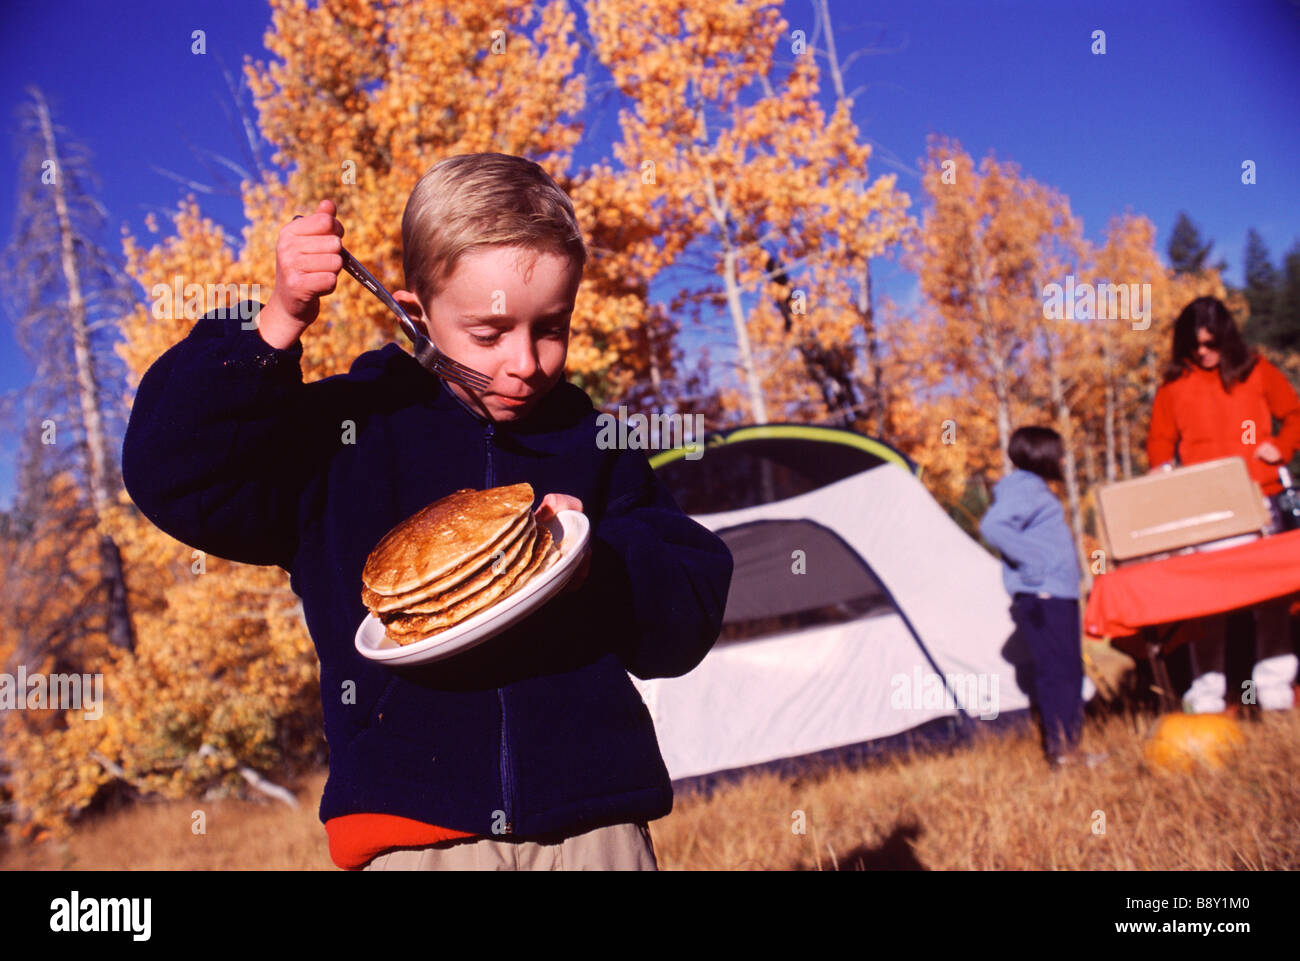 Boy holding a plate of breads and a fork while camping, Truckee, Nevada County, California, USA Stock Photo